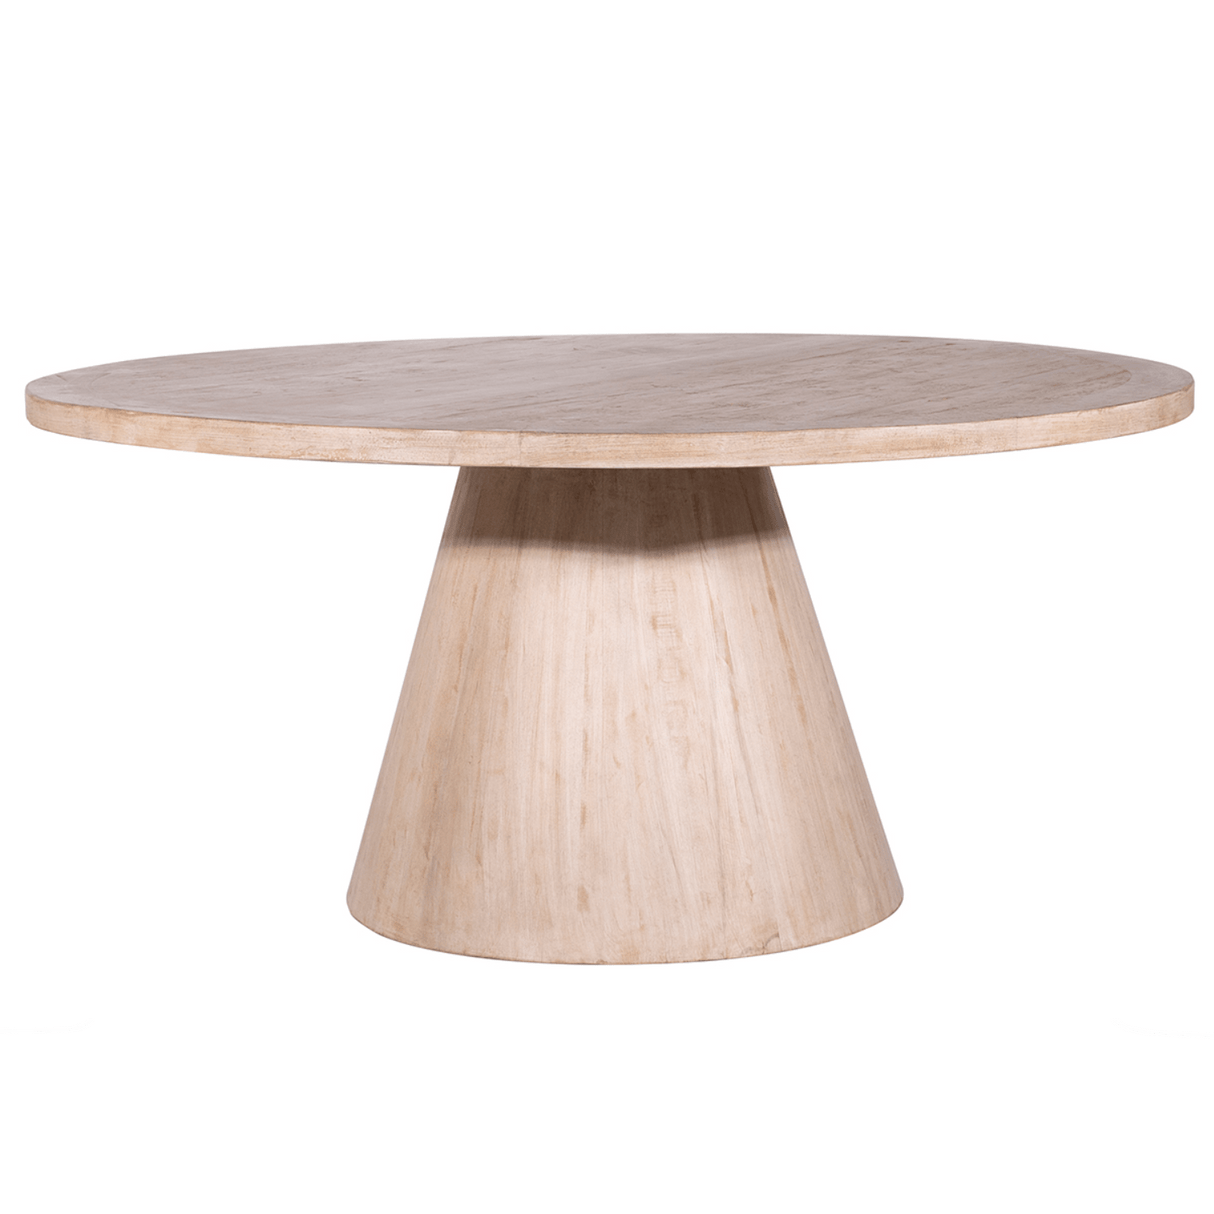 Dovetail Ross Round Dining Table Furniture dovetail-DOV38030